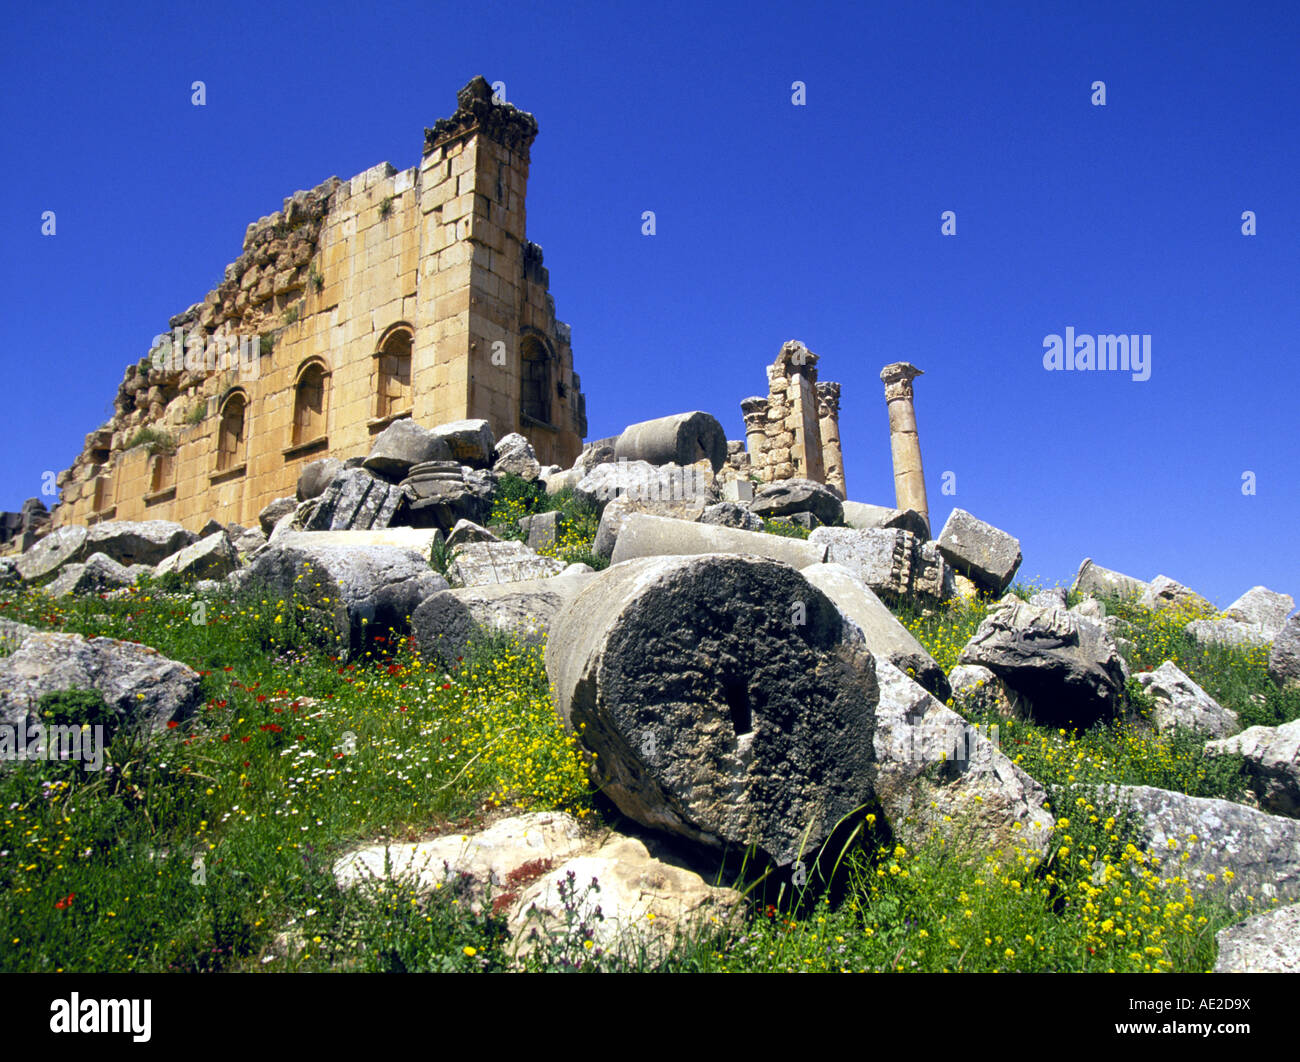 A view of the stone ruins in the ancient Roman and Crusader city of Jerash near Amman Jordan Stock Photo